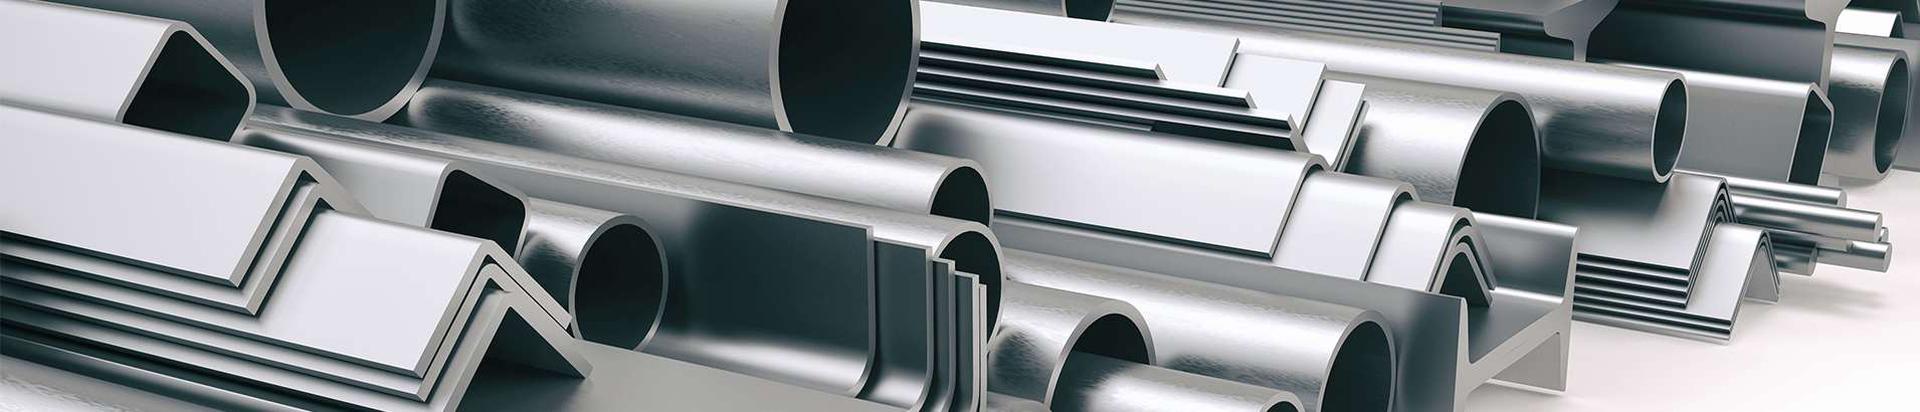 mineral resources and raw materials, Profile metal, Round pipes and quadriceps tubes, Armature, Special profiles, Stainless material, Aluminium material, bulk metal purchase, stainless angle iron, cold-drawn stainless round rod h9